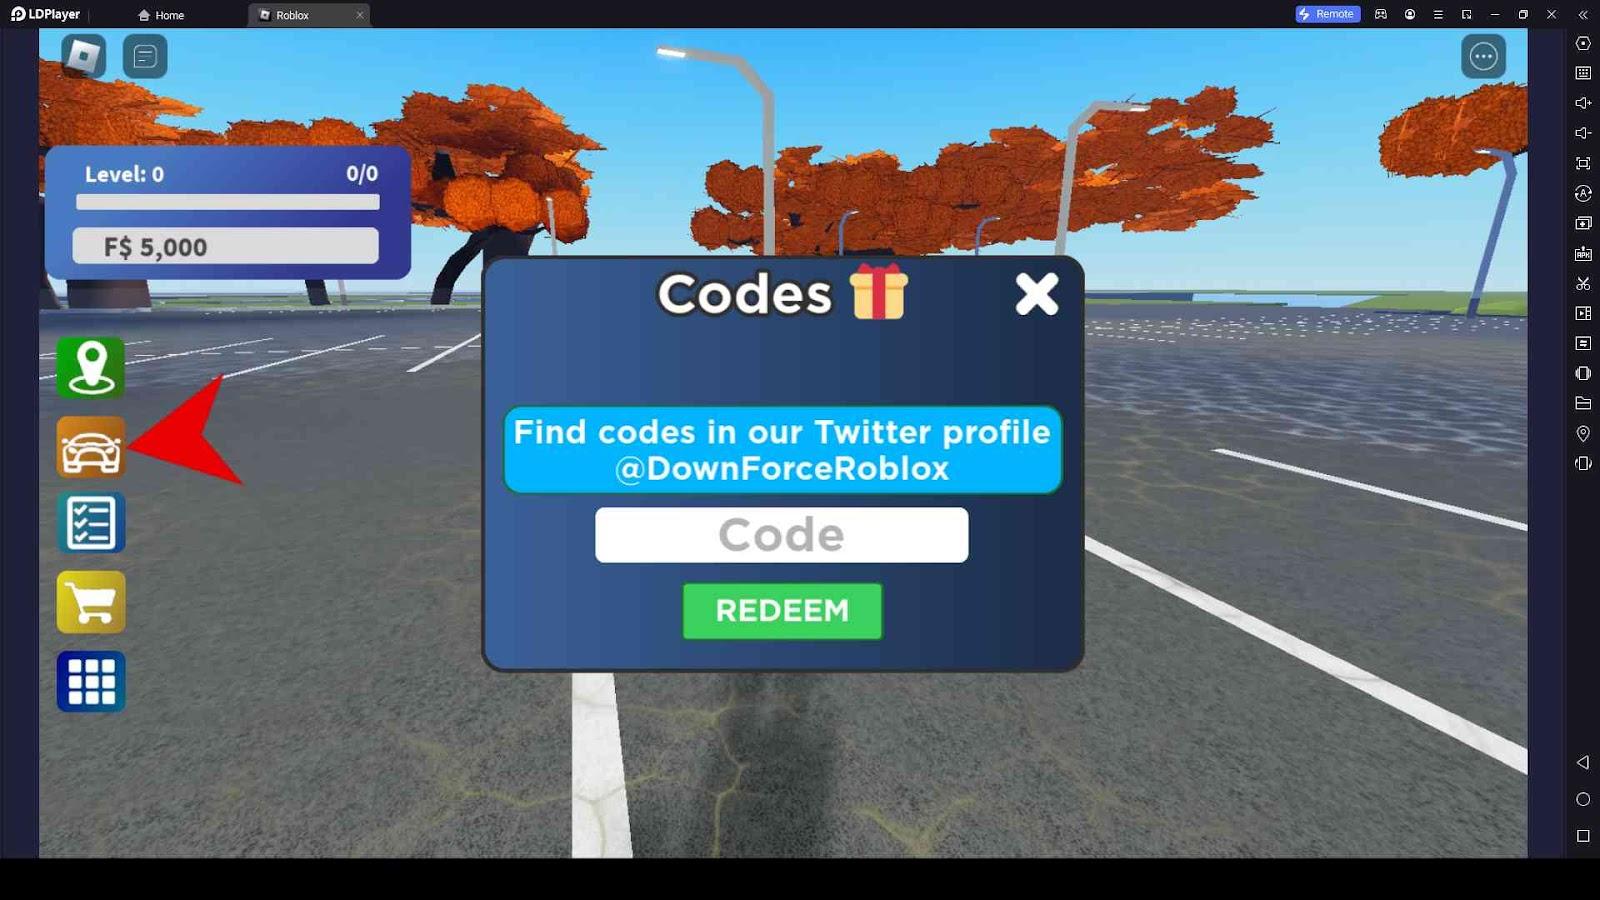 ALL CODES in Roblox Jailbreak! NEW TWITTER PROMO CODES! *FREE CASH*